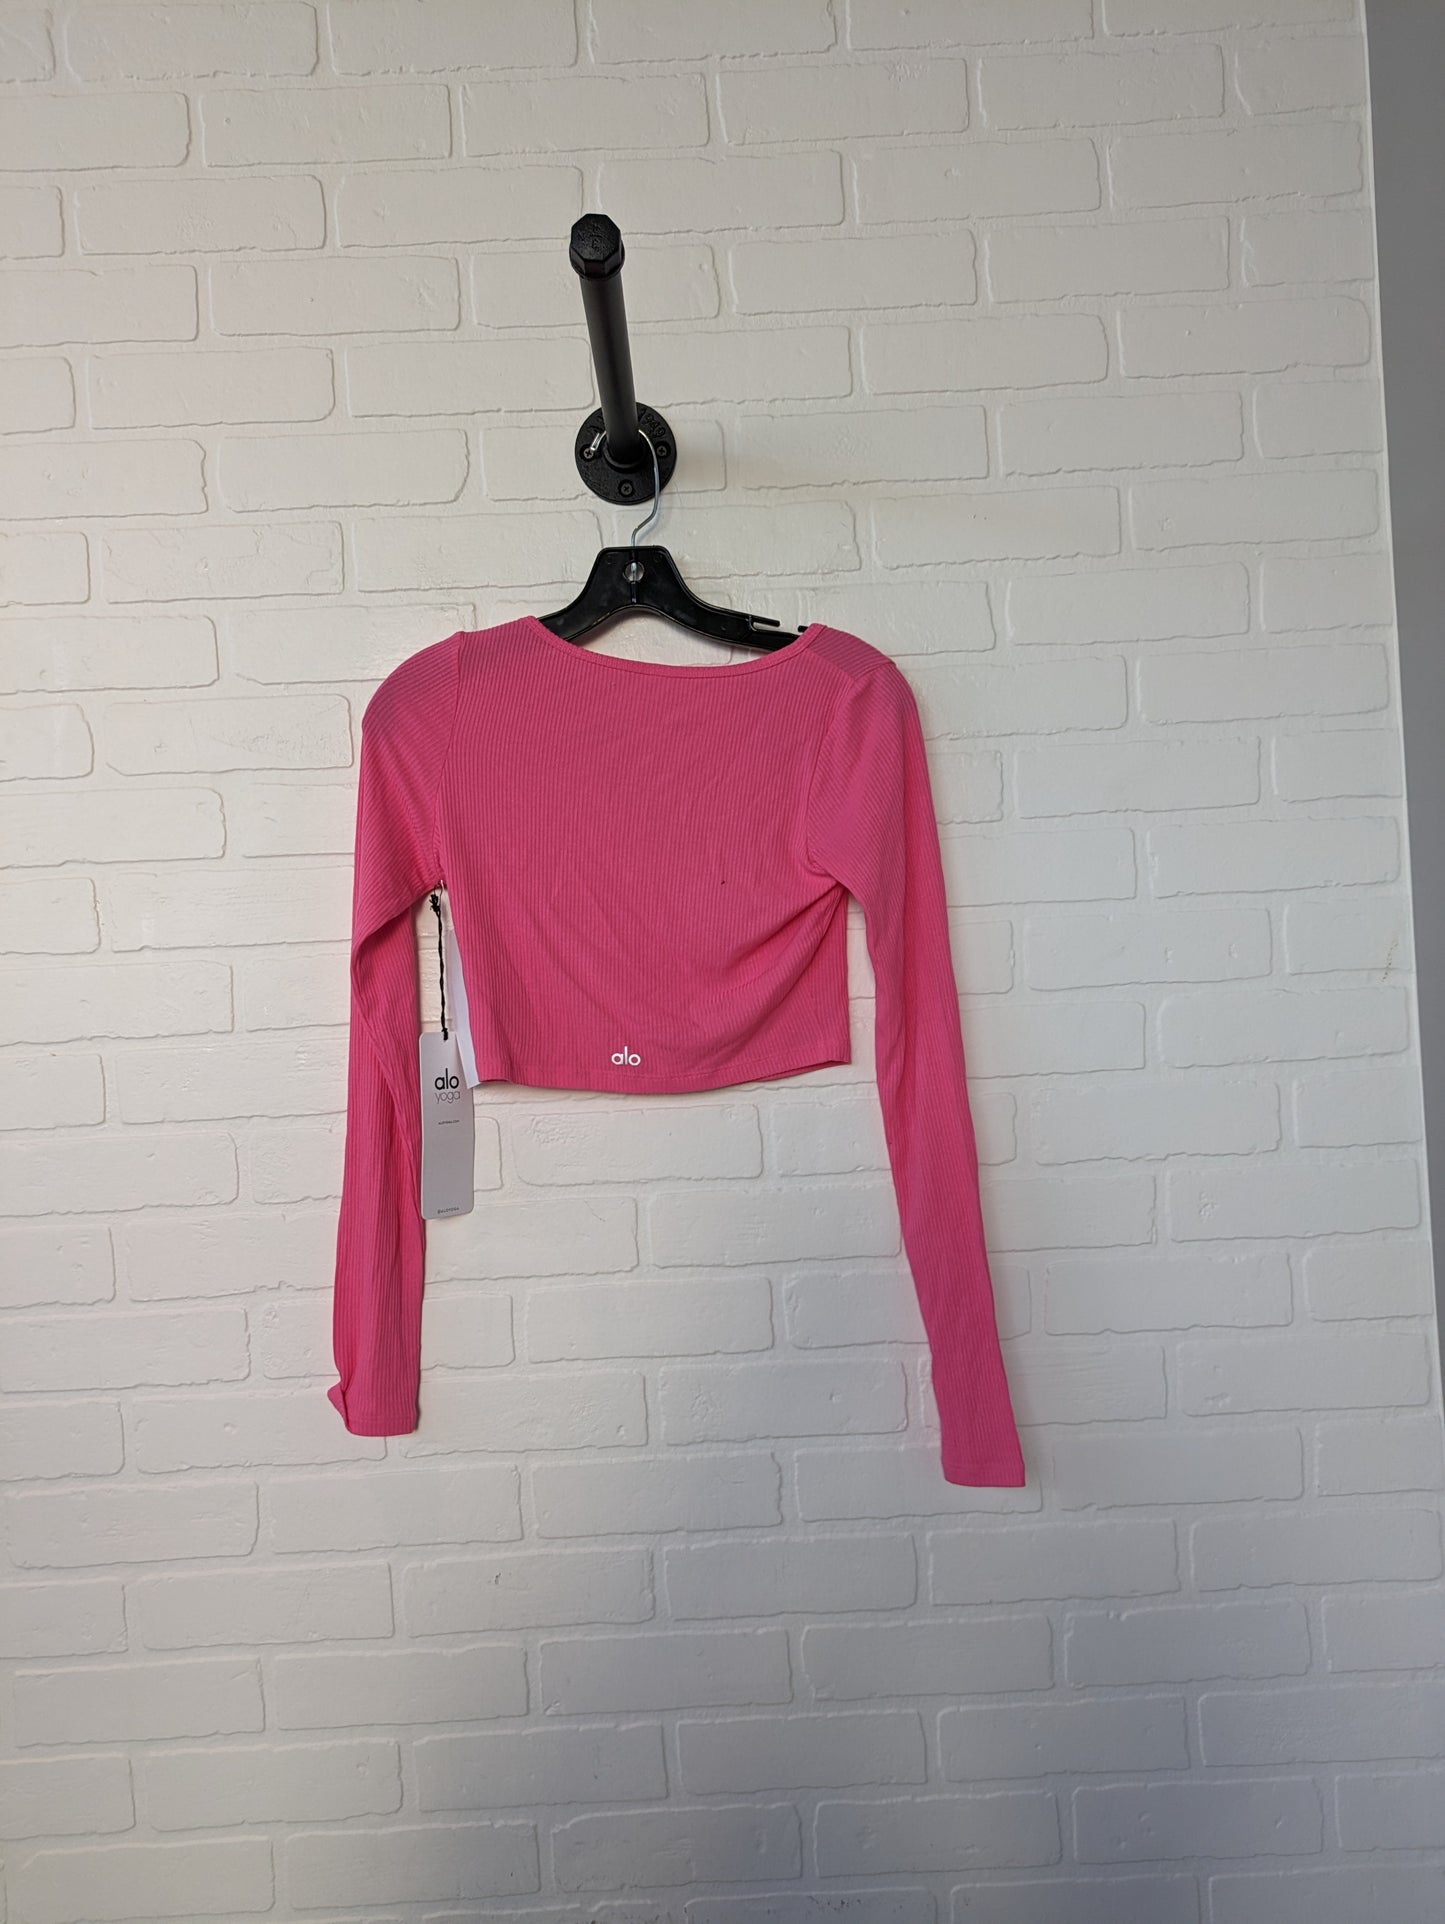 Athletic Top Long Sleeve Crewneck By Alo  Size: S